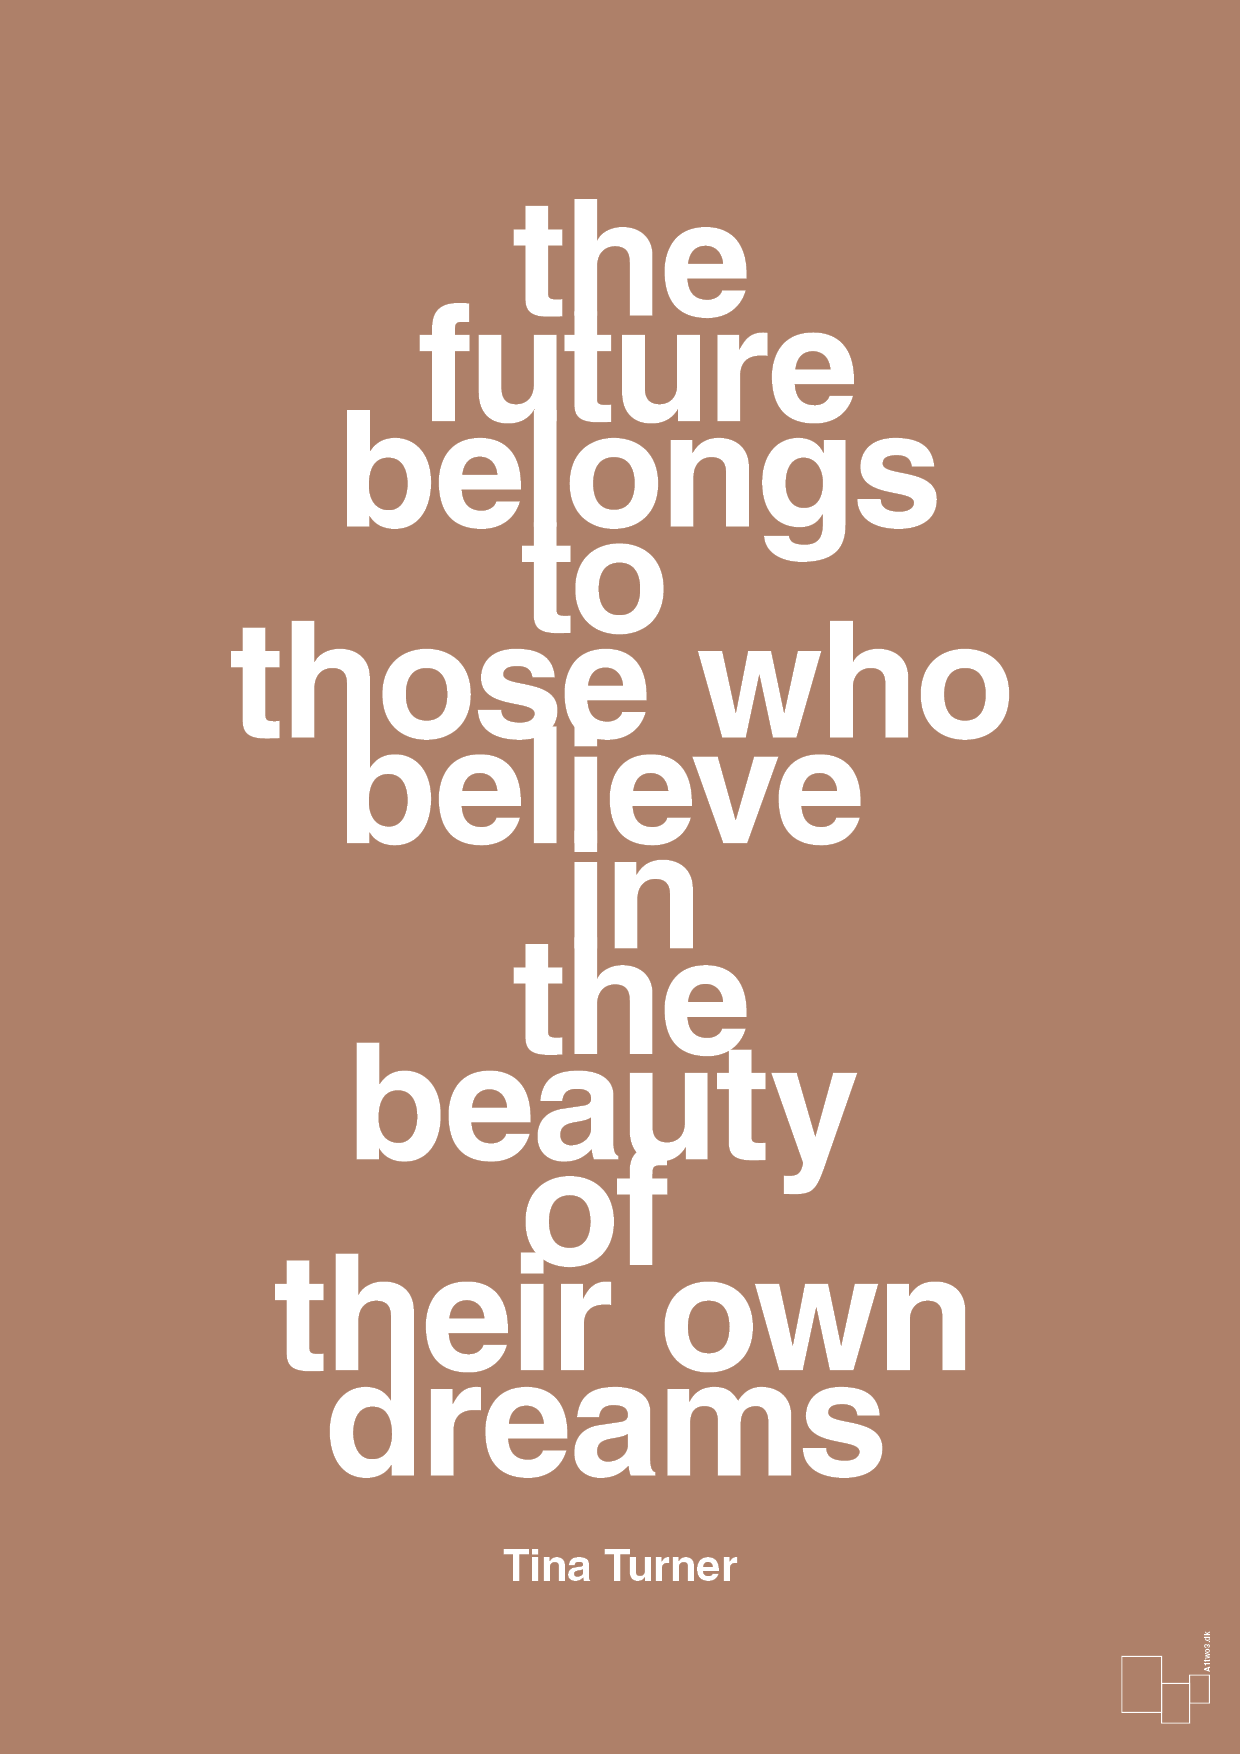 the future belongs to those who believe in the beauty of their own dreams - Plakat med Citater i Cider Spice